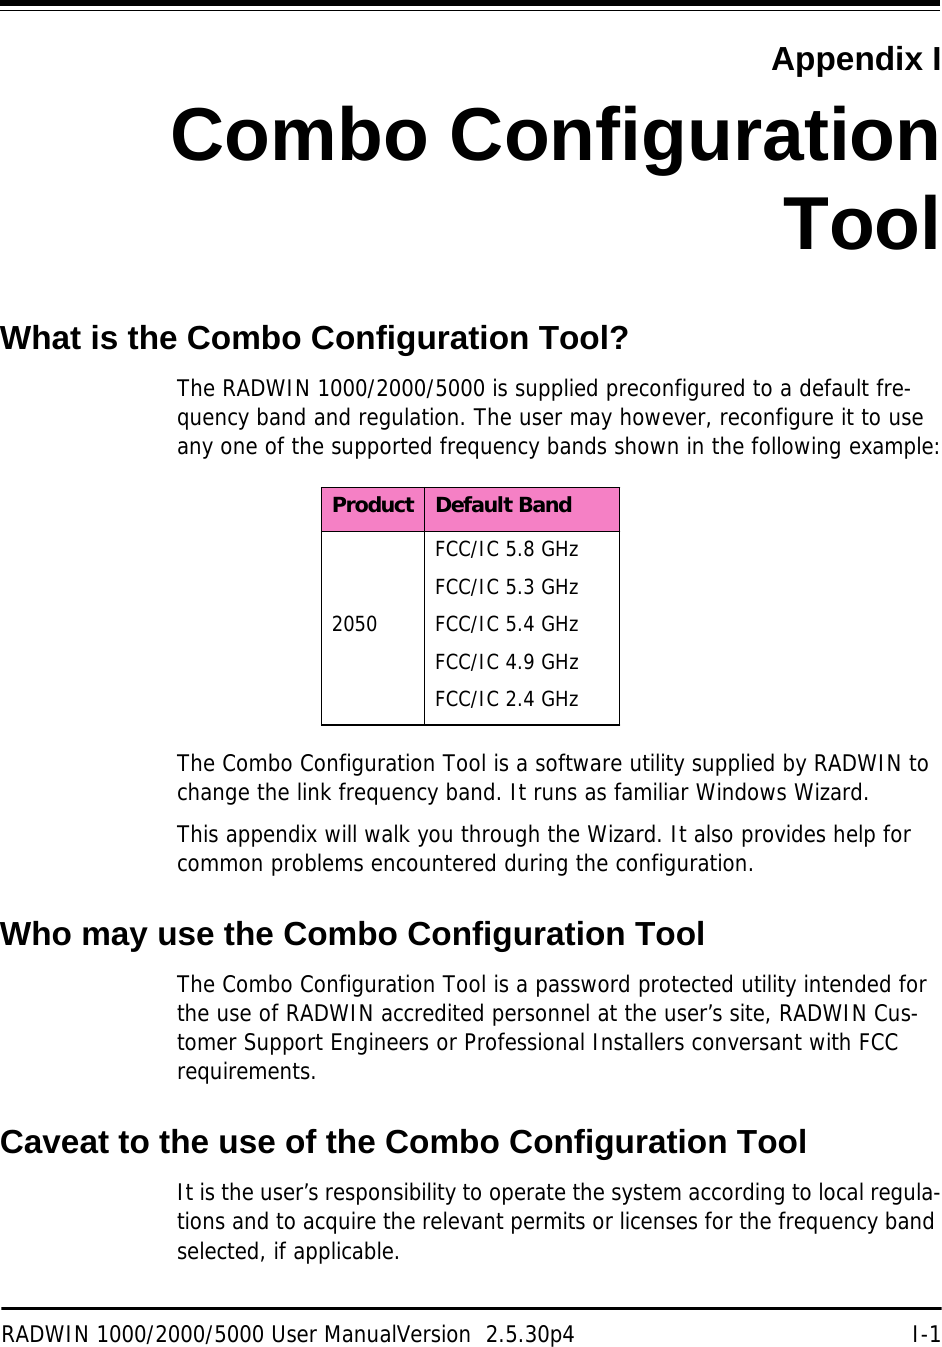 RADWIN 1000/2000/5000 User ManualVersion  2.5.30p4 I-1Appendix ICombo ConfigurationToolWhat is the Combo Configuration Tool?The RADWIN 1000/2000/5000 is supplied preconfigured to a default fre-quency band and regulation. The user may however, reconfigure it to use any one of the supported frequency bands shown in the following example:The Combo Configuration Tool is a software utility supplied by RADWIN to change the link frequency band. It runs as familiar Windows Wizard.This appendix will walk you through the Wizard. It also provides help for common problems encountered during the configuration.Who may use the Combo Configuration ToolThe Combo Configuration Tool is a password protected utility intended for the use of RADWIN accredited personnel at the user’s site, RADWIN Cus-tomer Support Engineers or Professional Installers conversant with FCC requirements.Caveat to the use of the Combo Configuration ToolIt is the user’s responsibility to operate the system according to local regula-tions and to acquire the relevant permits or licenses for the frequency band selected, if applicable.Product Default Band2050FCC/IC 5.8 GHzFCC/IC 5.3 GHzFCC/IC 5.4 GHzFCC/IC 4.9 GHzFCC/IC 2.4 GHz